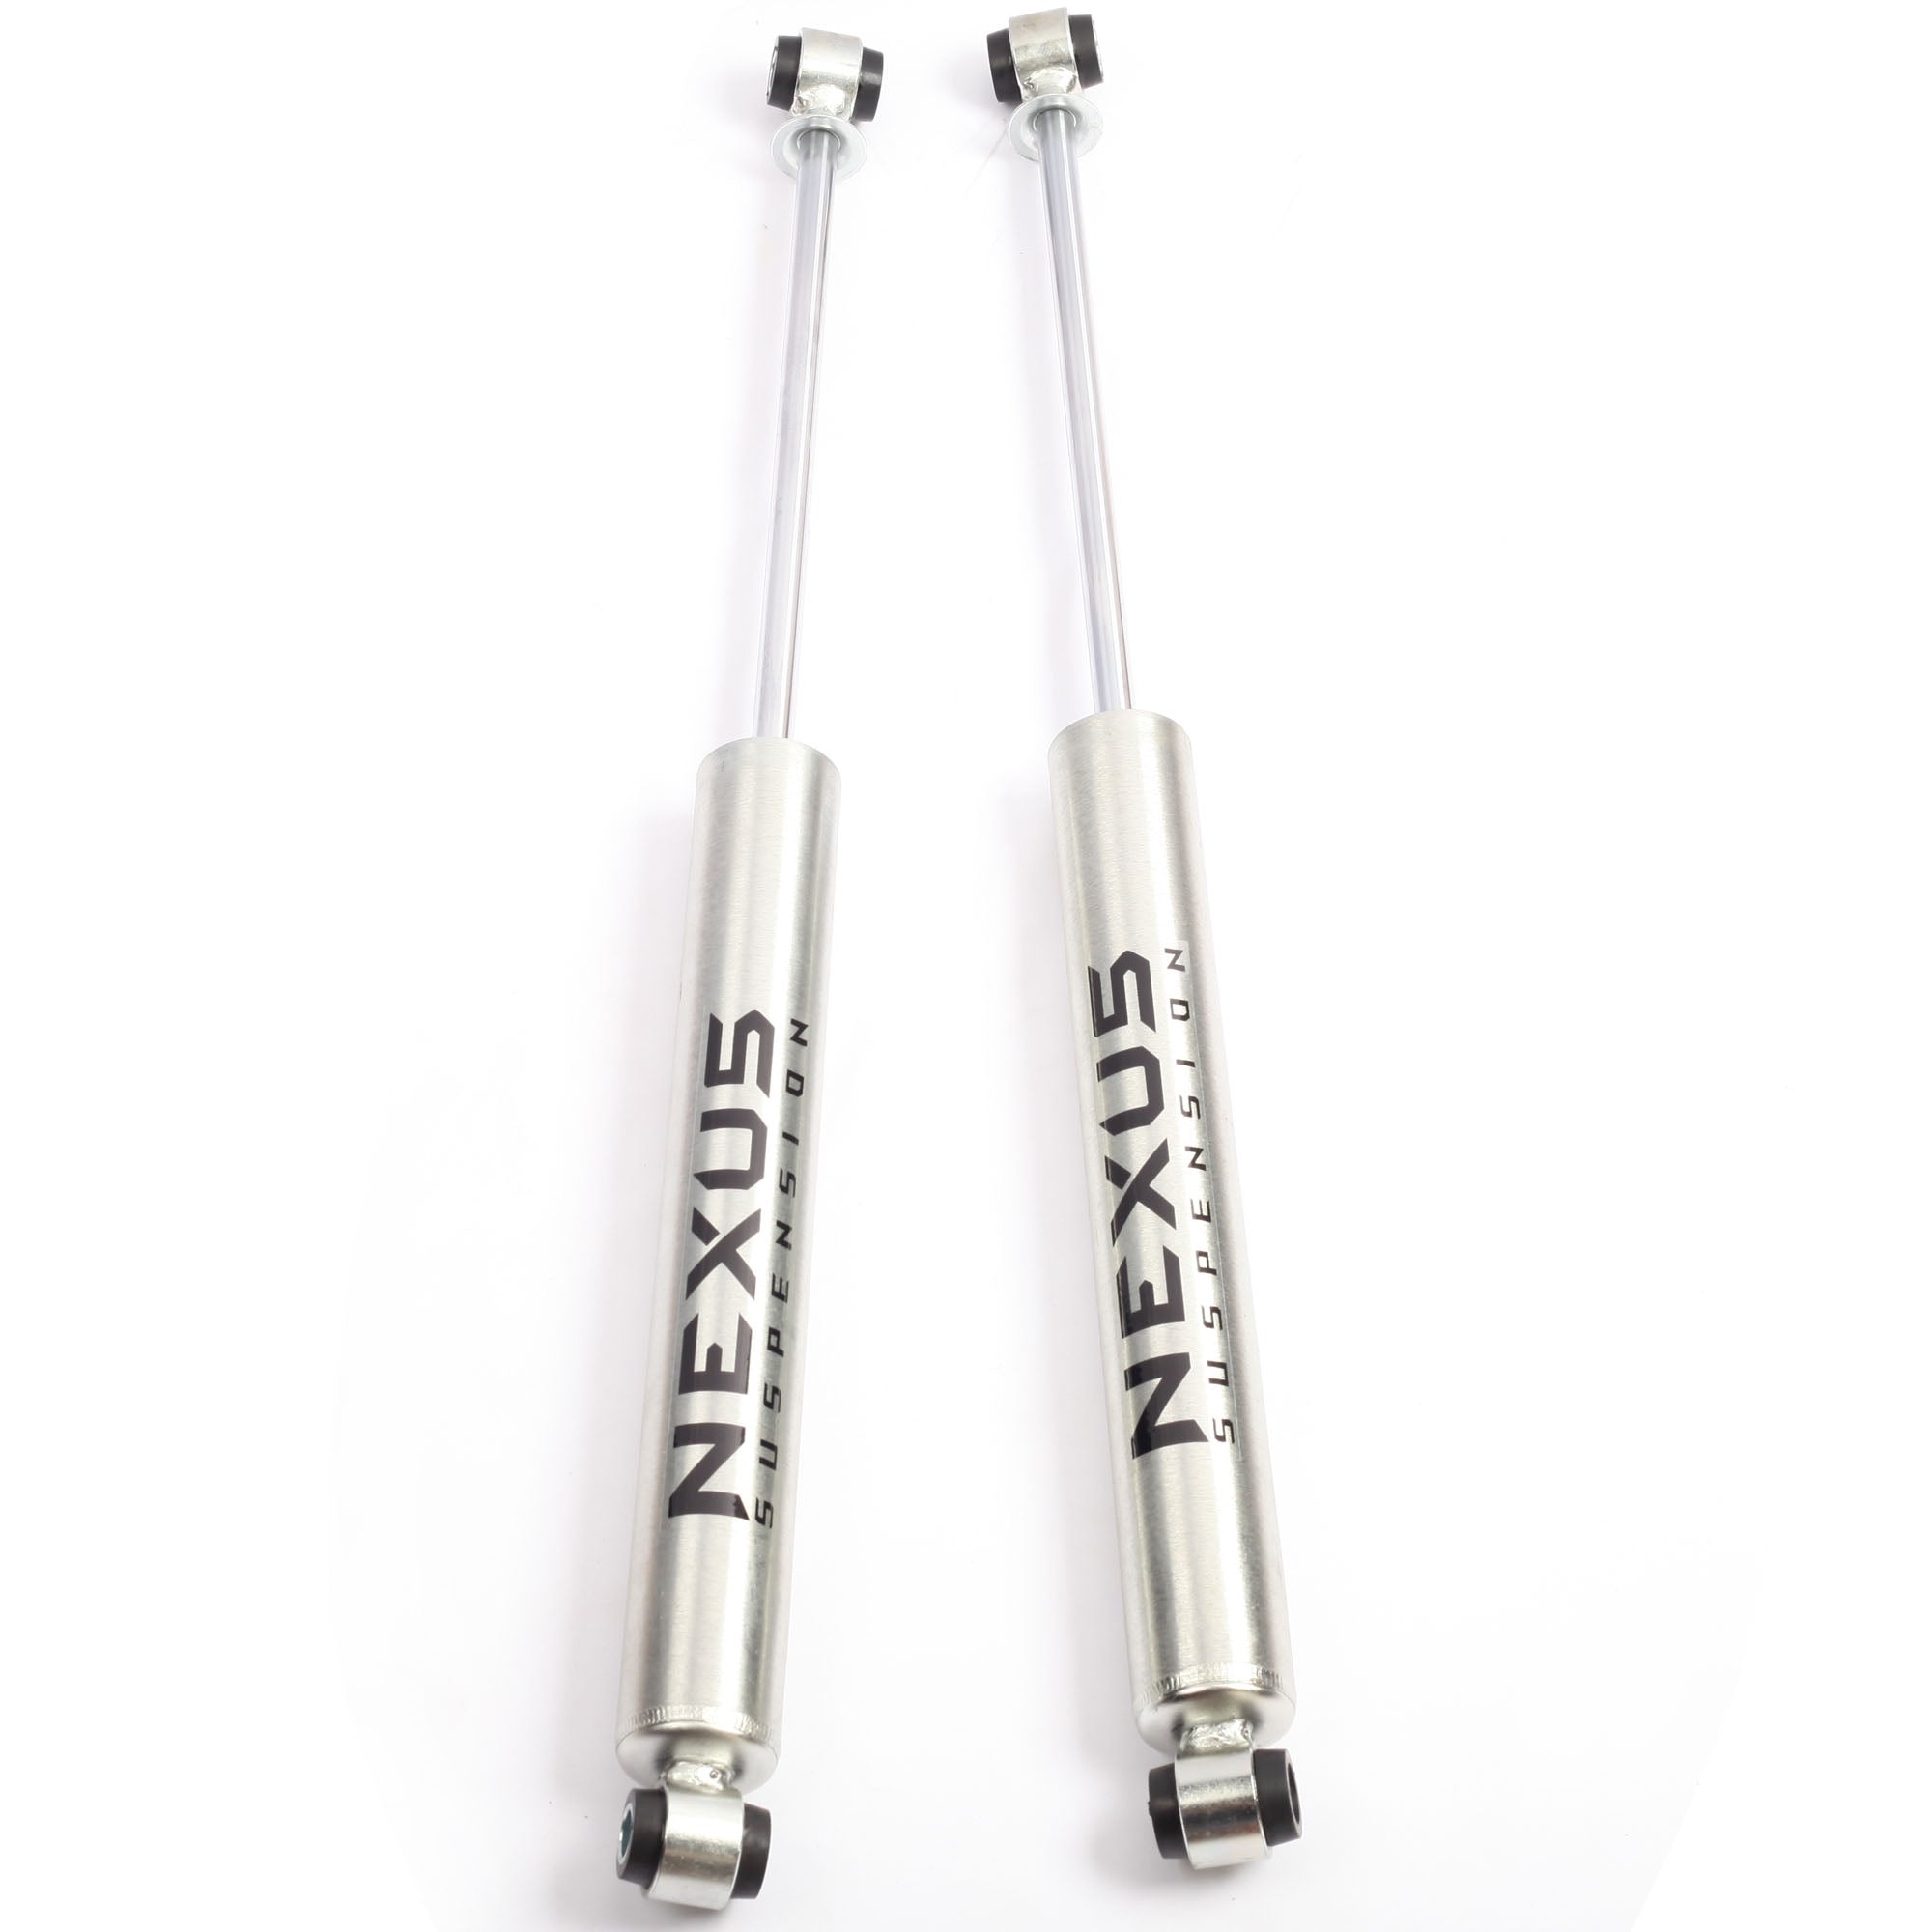 NEXUS SUSPENSION 6Inch Lift Rear Shock Absorber for 2002-2013 Chevrolet Avalanche 1500 4WD,Zinc Plated Coating,Pair Pack